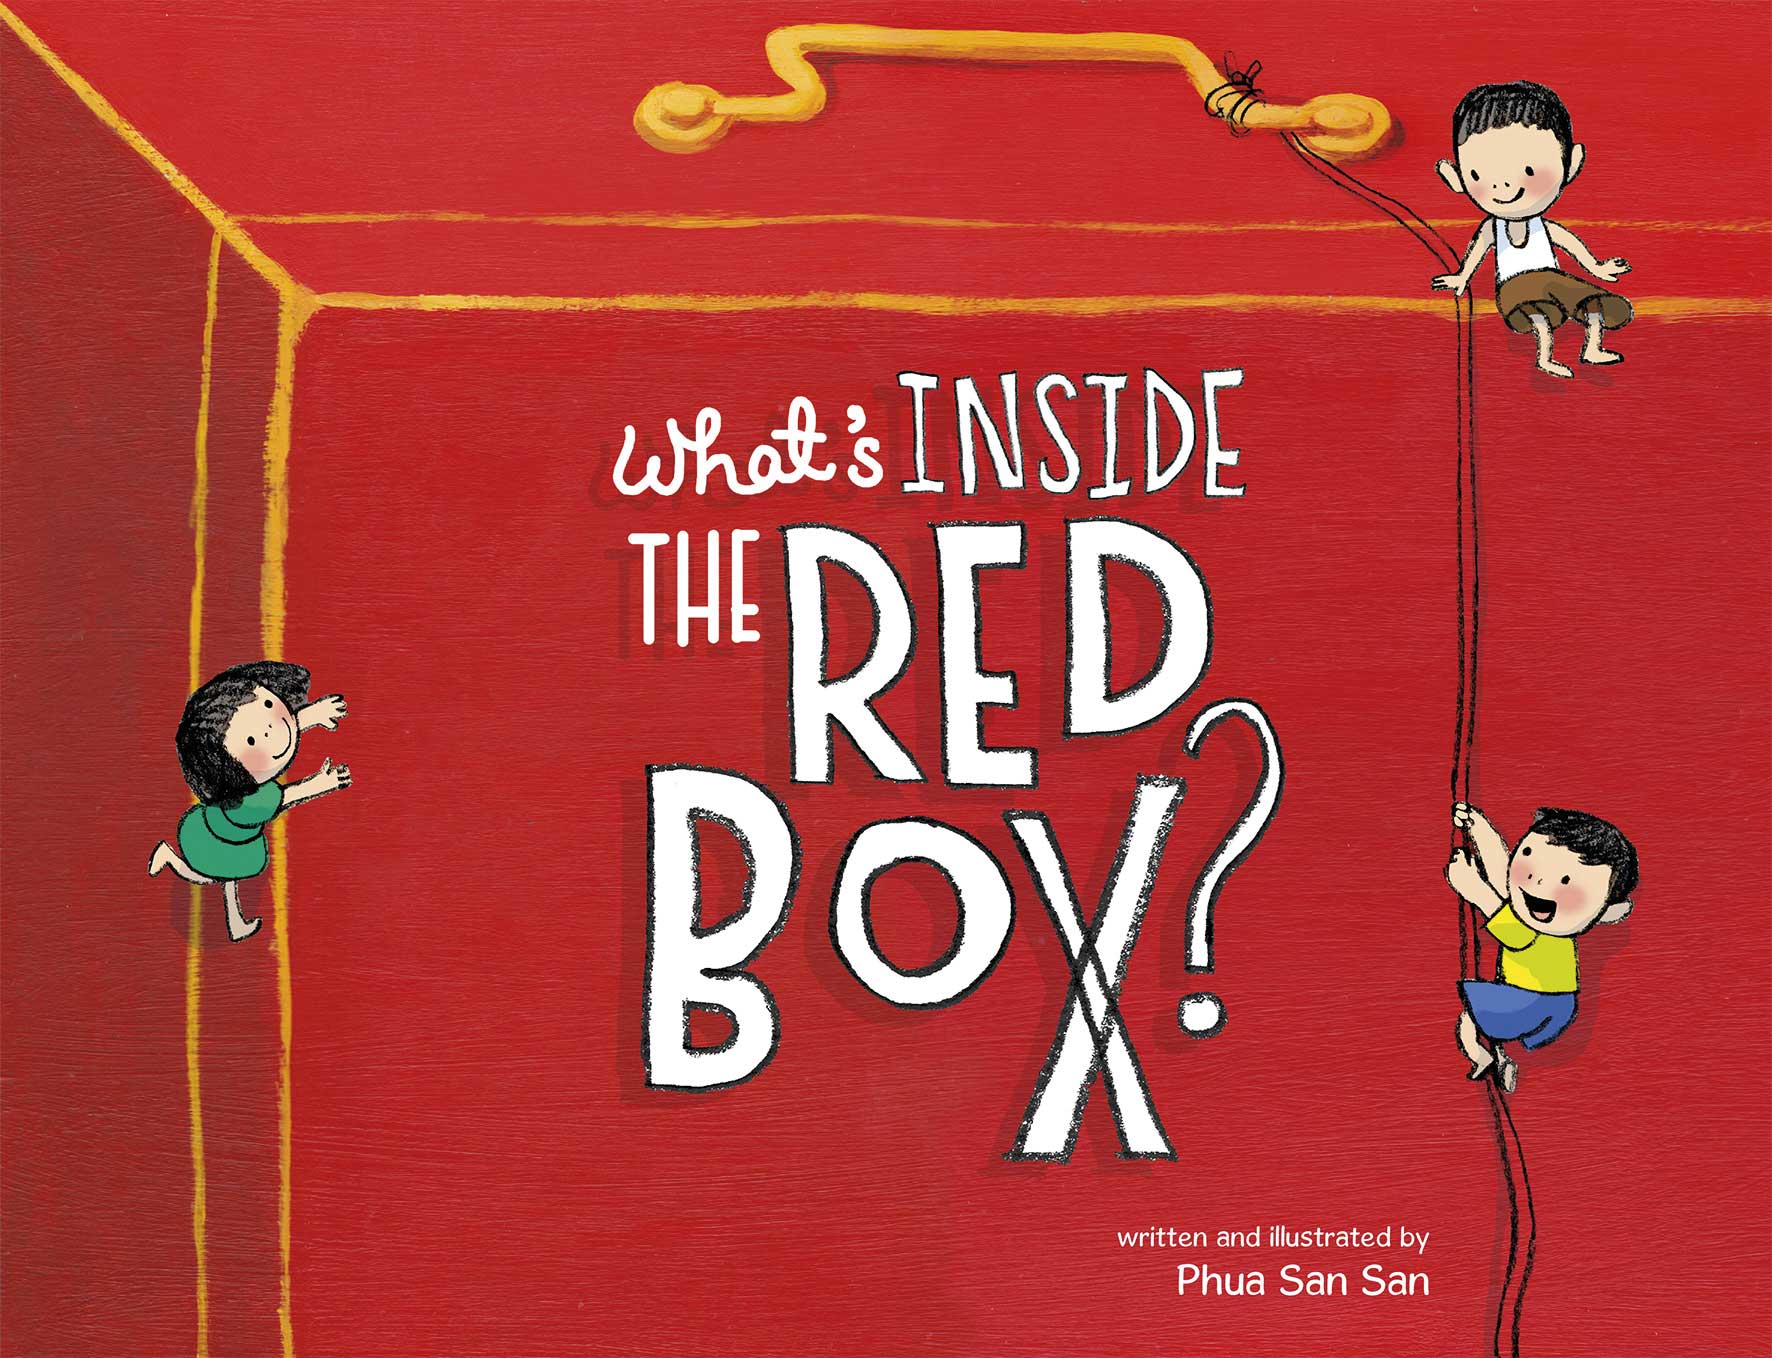 WHAT'S INSIDE THE RED BOX?